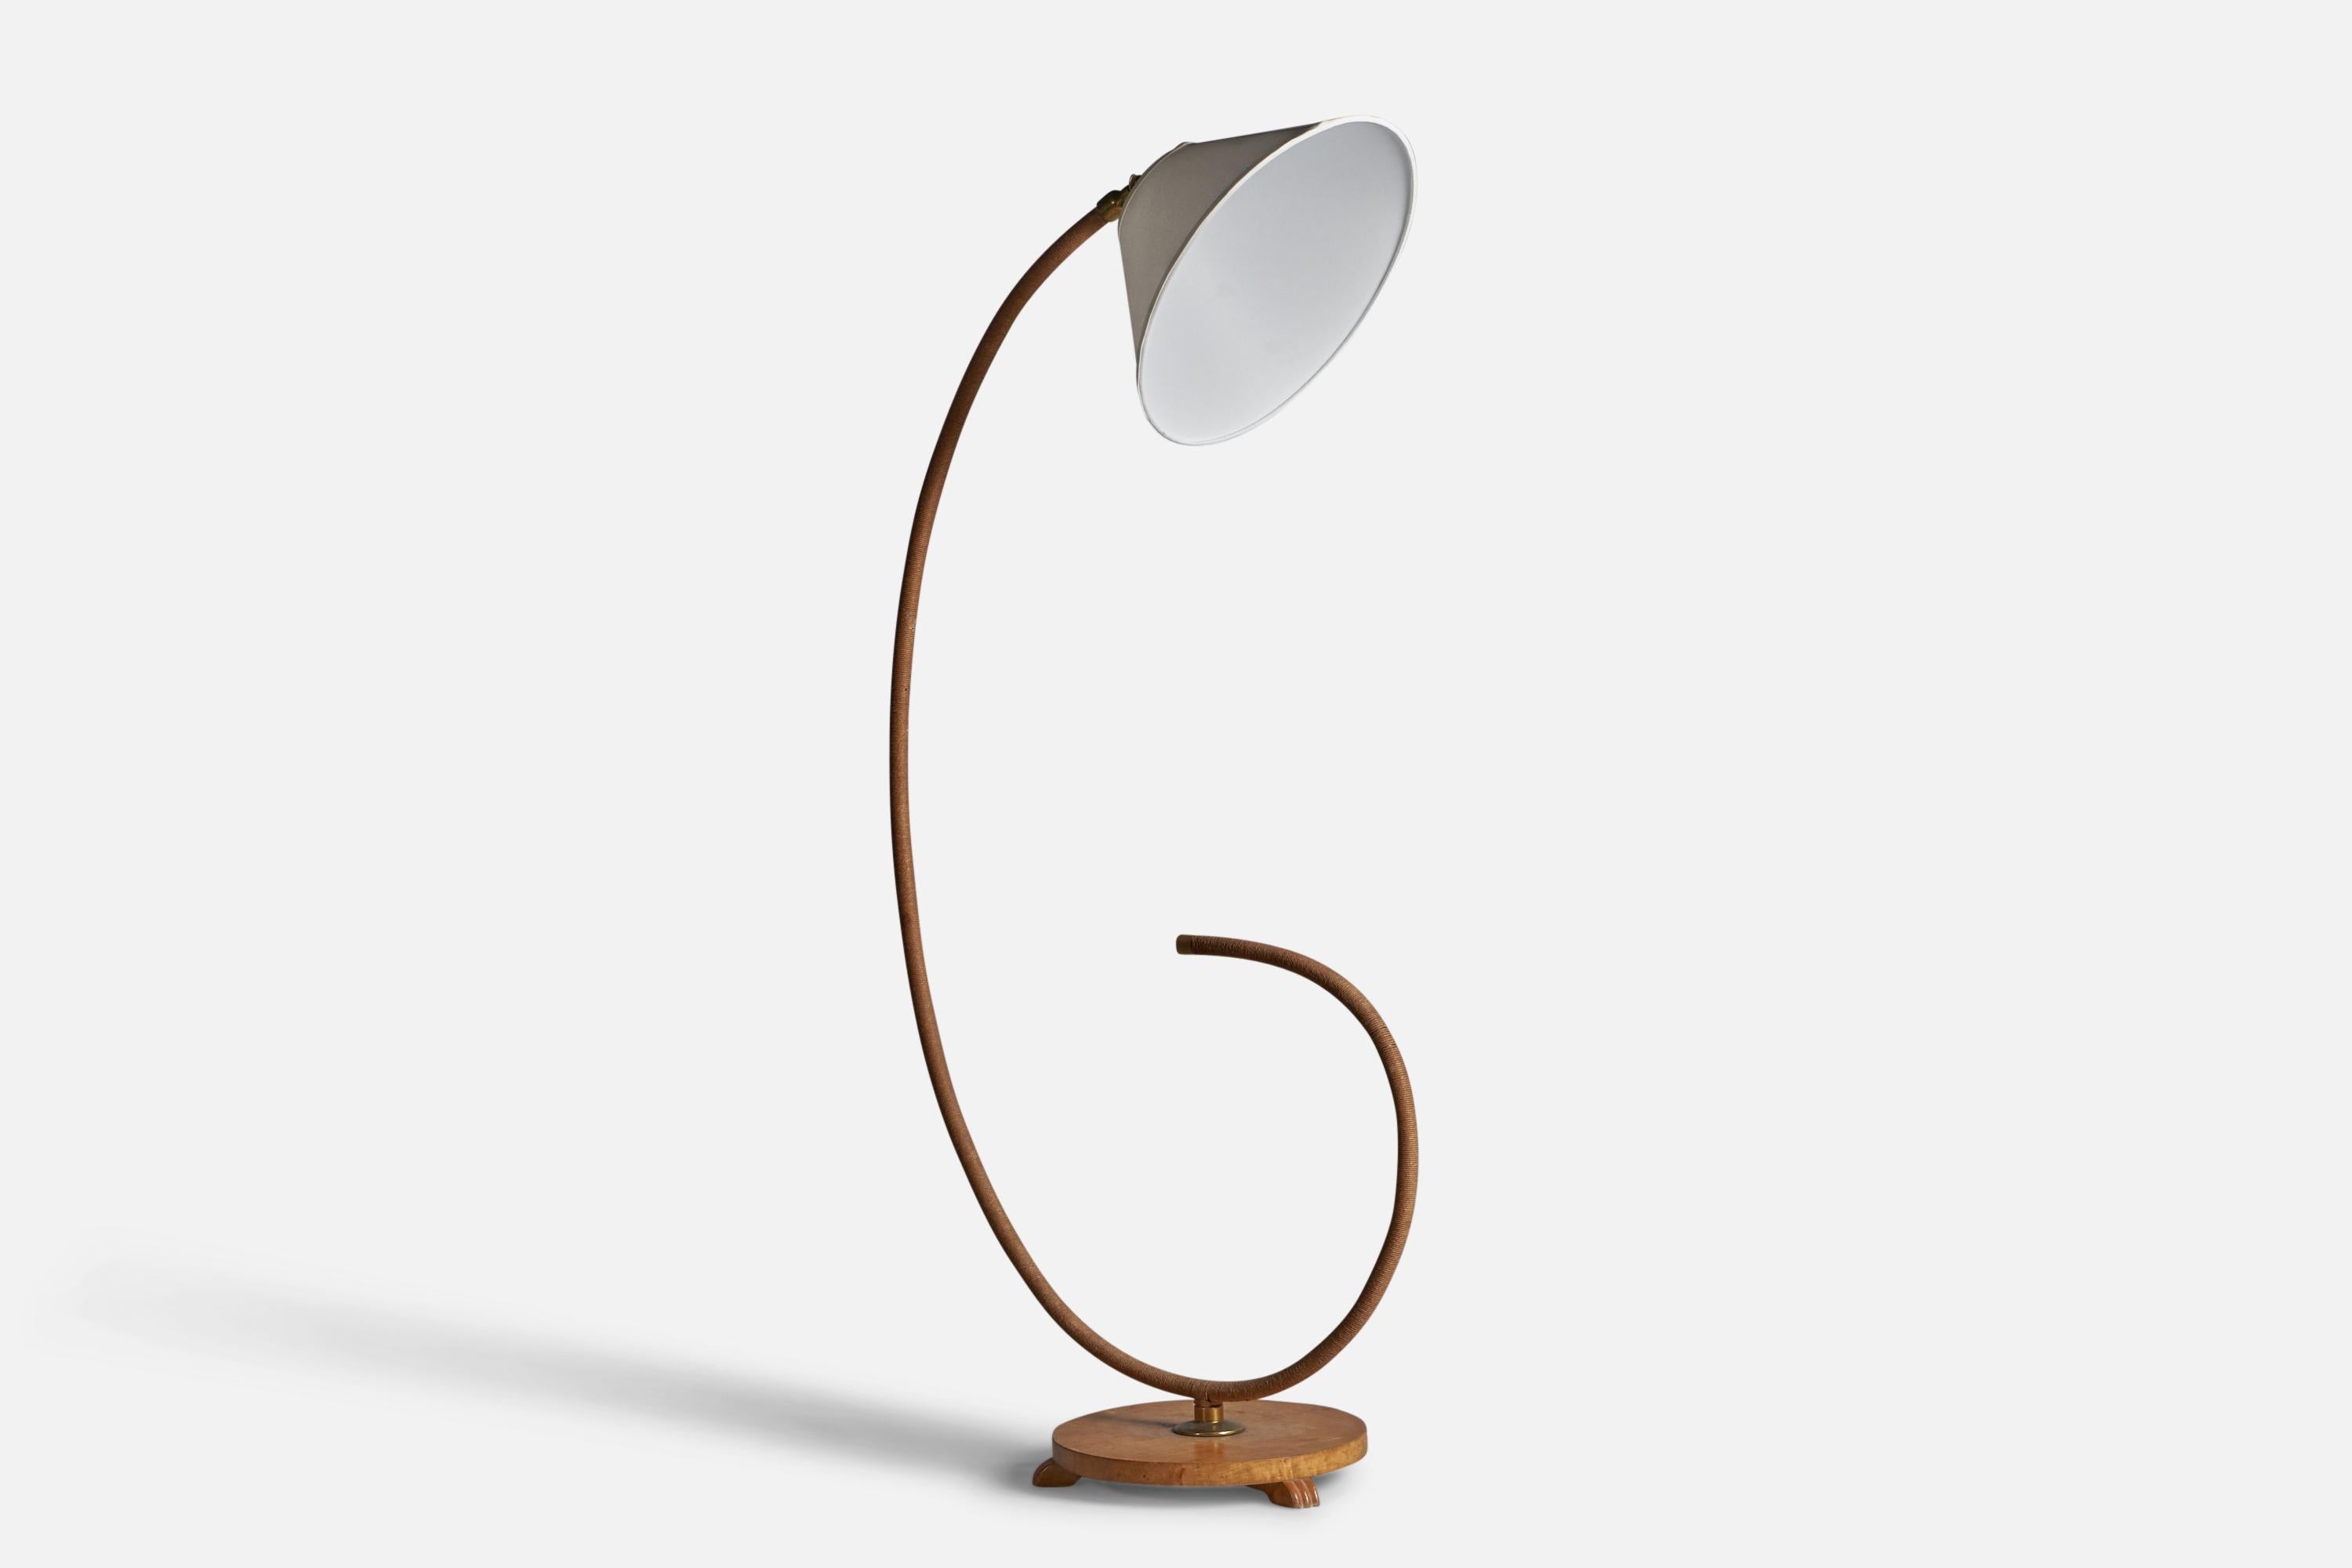 A curved brass, cord, white fabric and wood floor lamp, designed and produced in Sweden, c. 1930s.

Overall Dimensions: 65